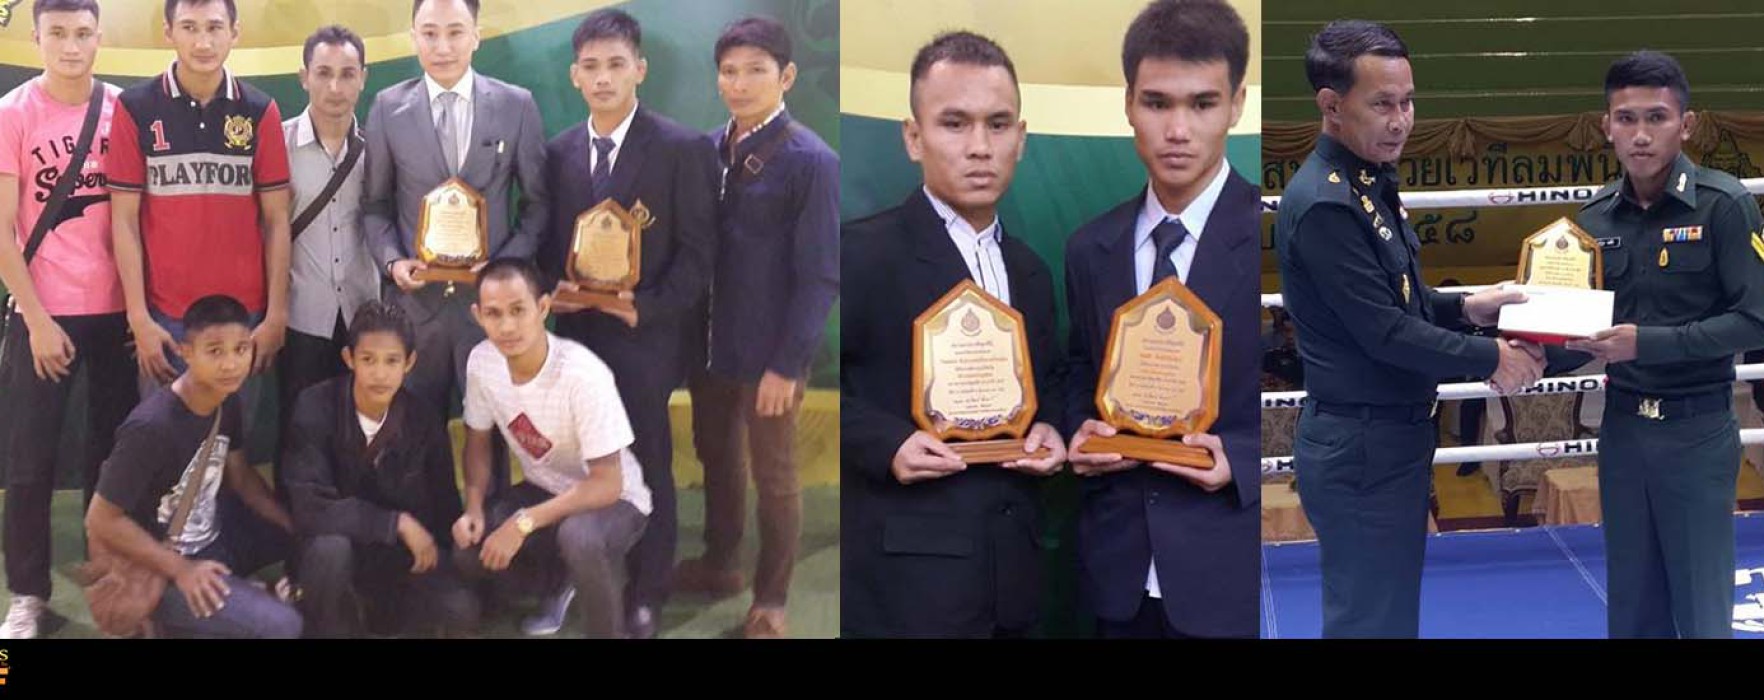 Video: Wanchalong vs Chaisiri awarded as fight of the year at Lumpinee St. awards 2014